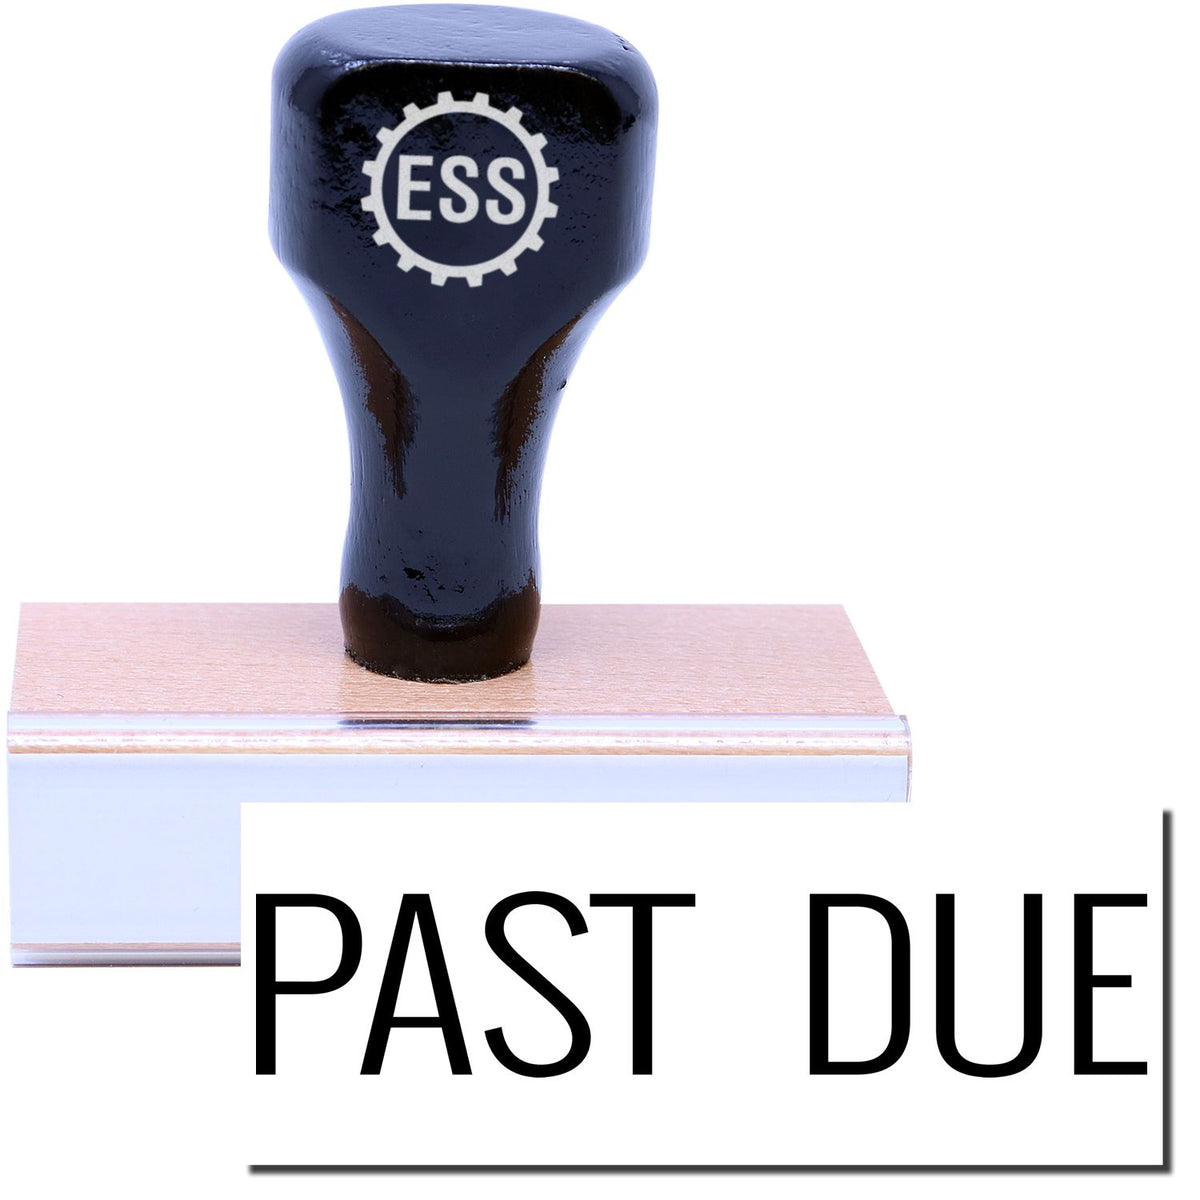 A stock office rubber stamp with a stamped image showing how the text &quot;PAST DUE&quot; in a large narrow font is displayed after stamping.